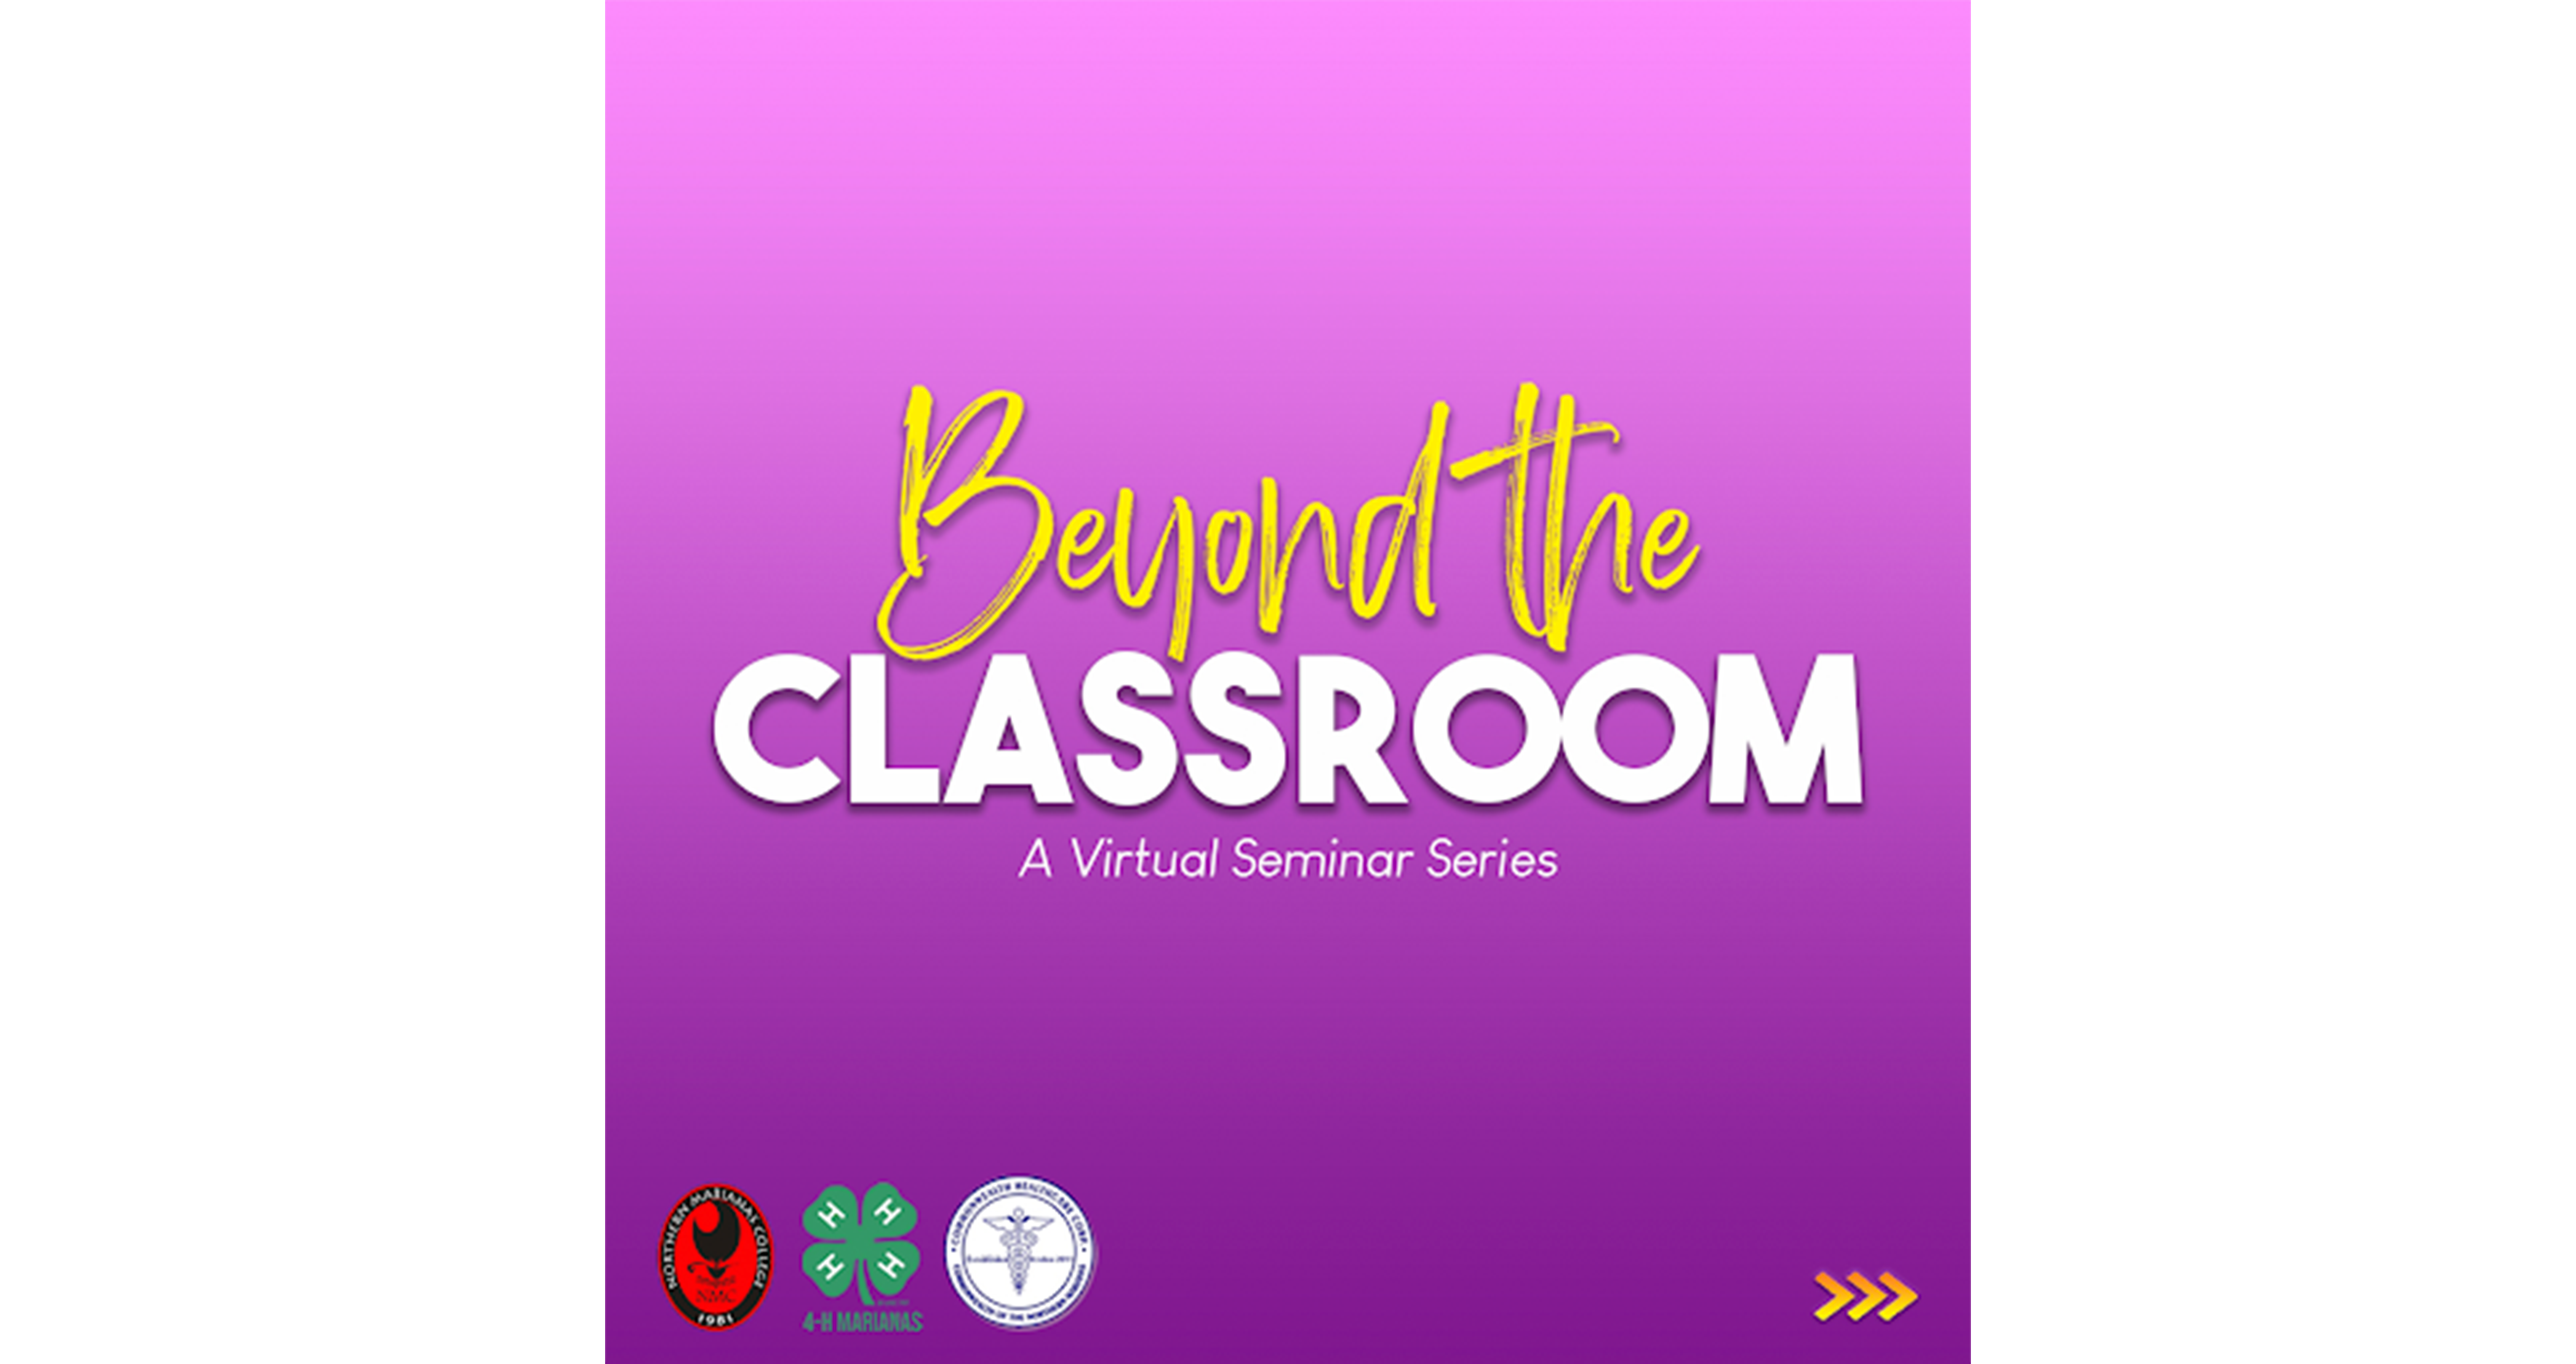 Beyond the Classroom: How to Support Others in Their Time of Need